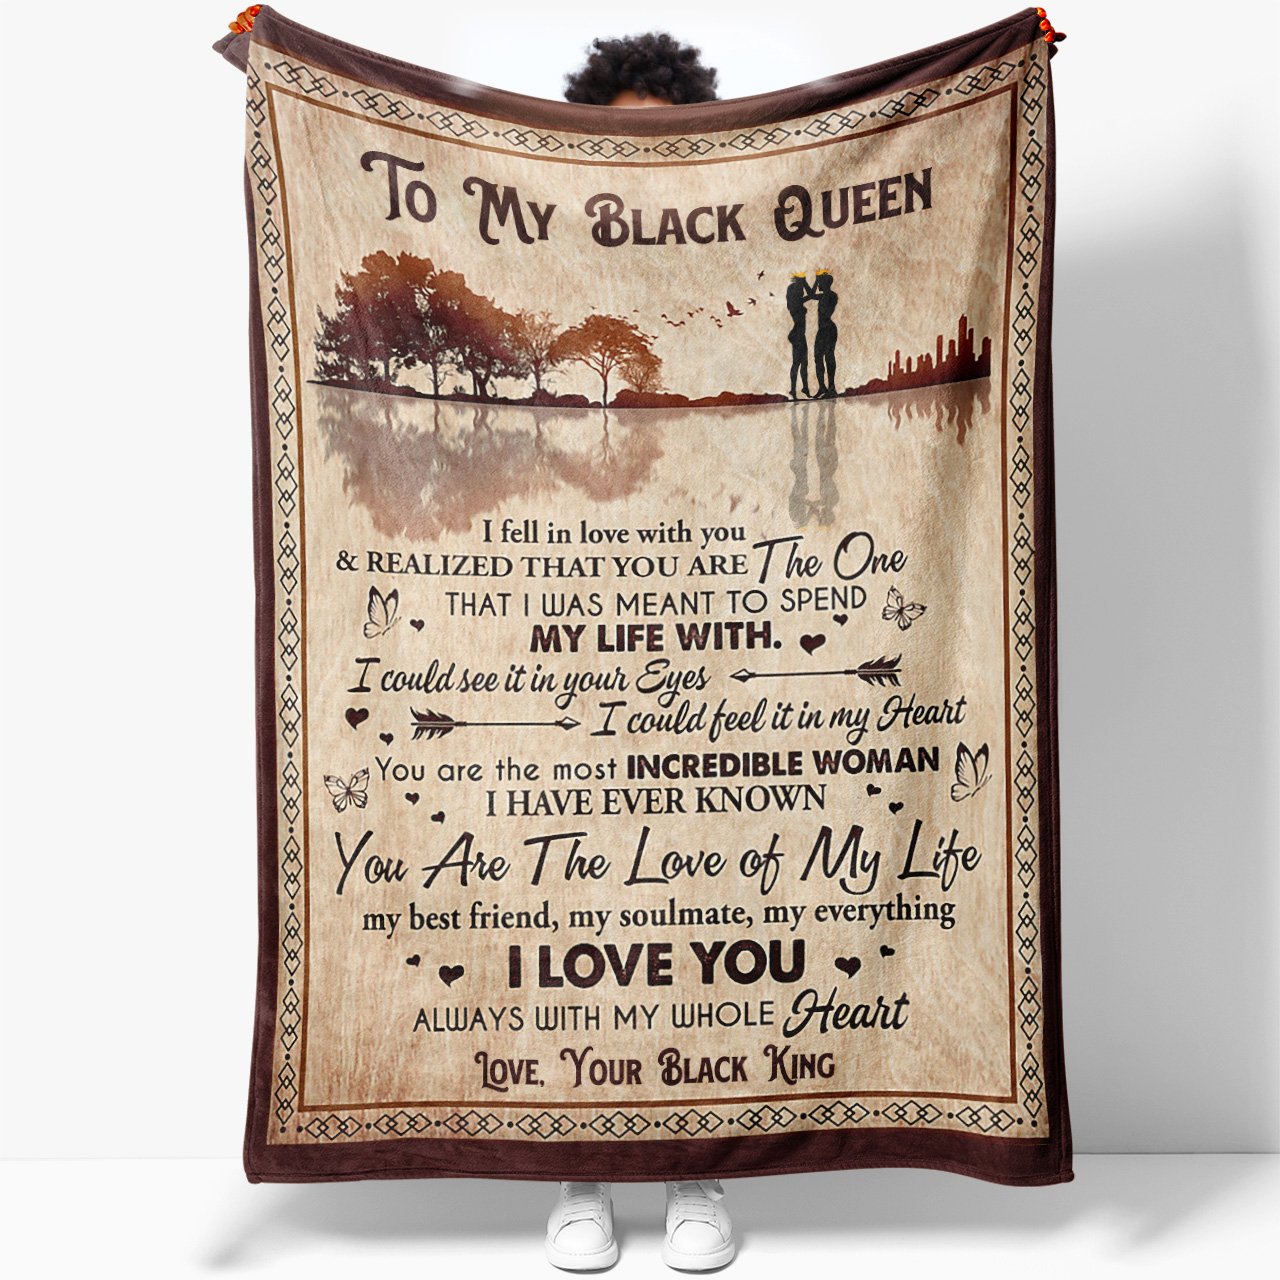 Blanket Gift Ideas For Black Queen, You Are The Incredible Woman Blanket, Anniversary Blanket Gift for Black Wife, Valentines Day Ideas For Her